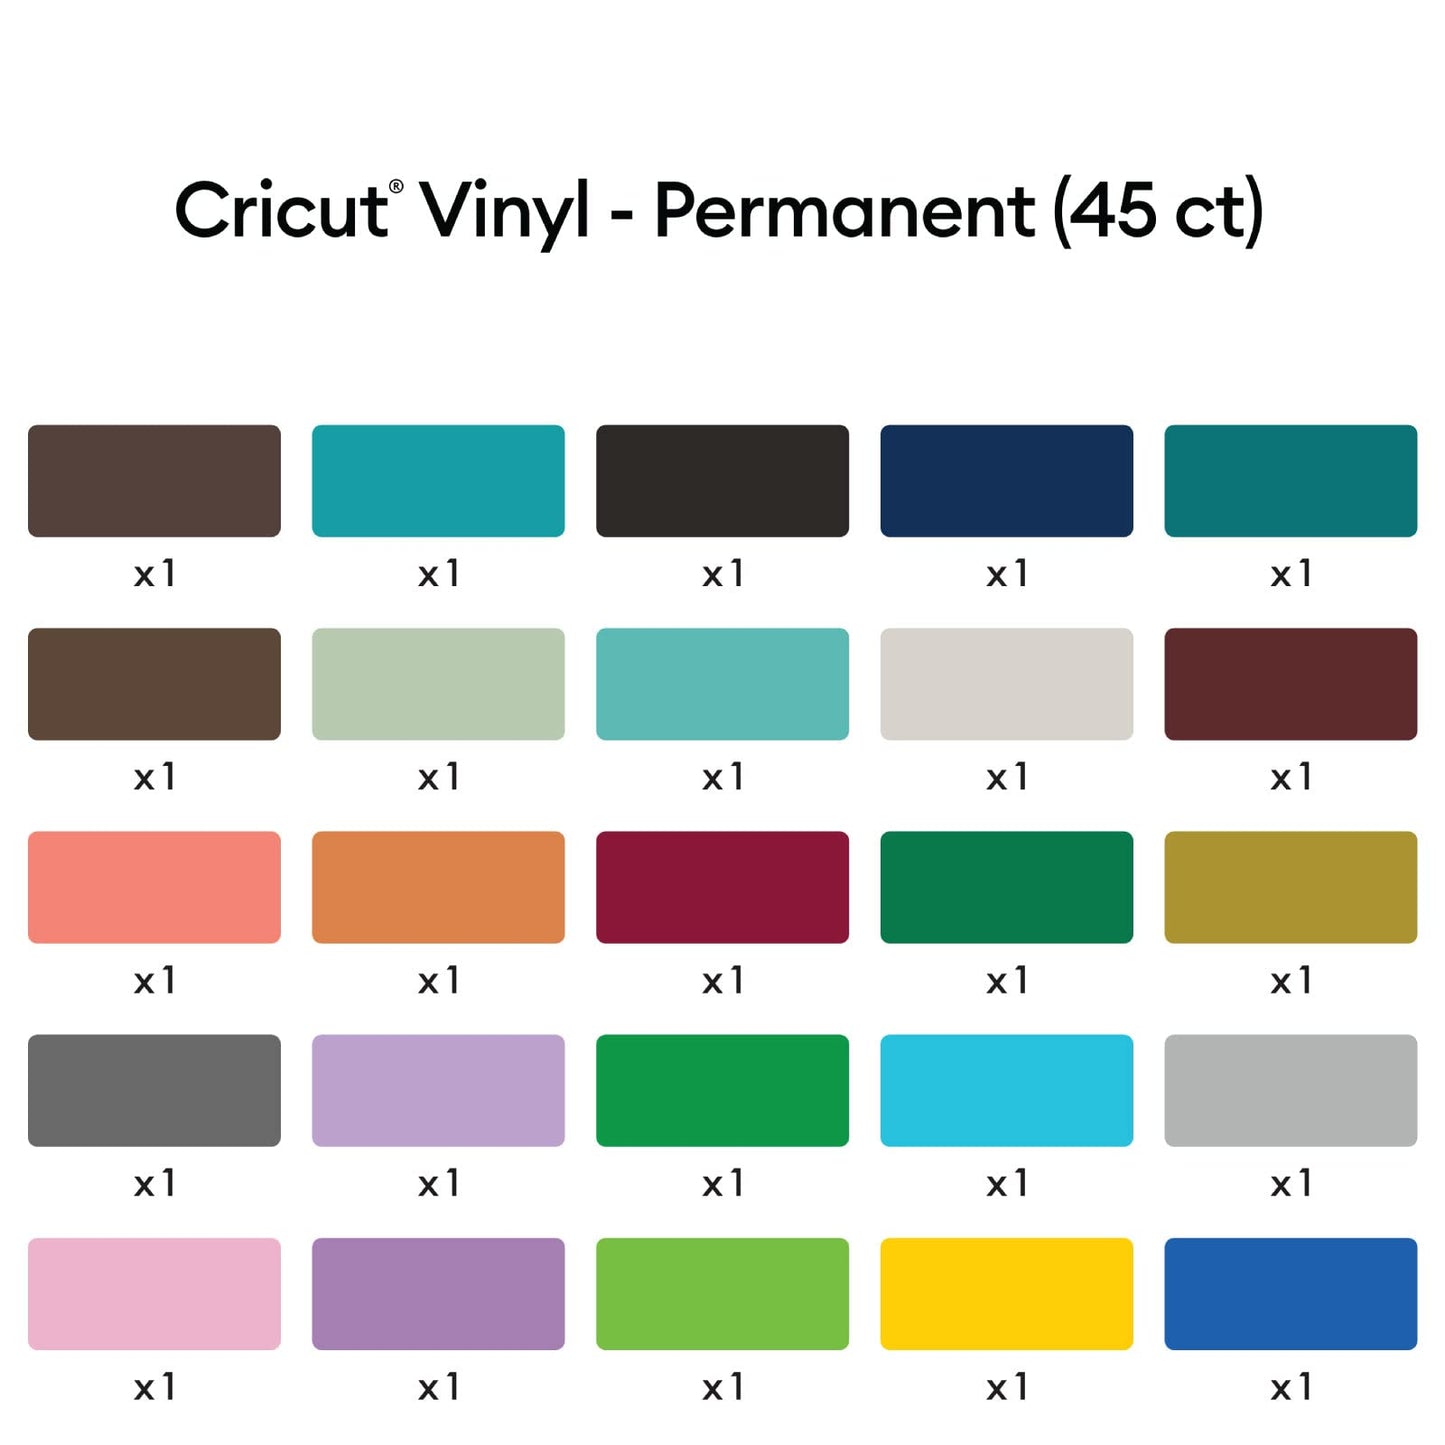 Cricut Vinyl Permanent - Everything Sampler, 12x12 Vinyl Sheets and Transfer Tapes, Create Long-Lasting DIY Projects, Durable Adhesive Vinyl for